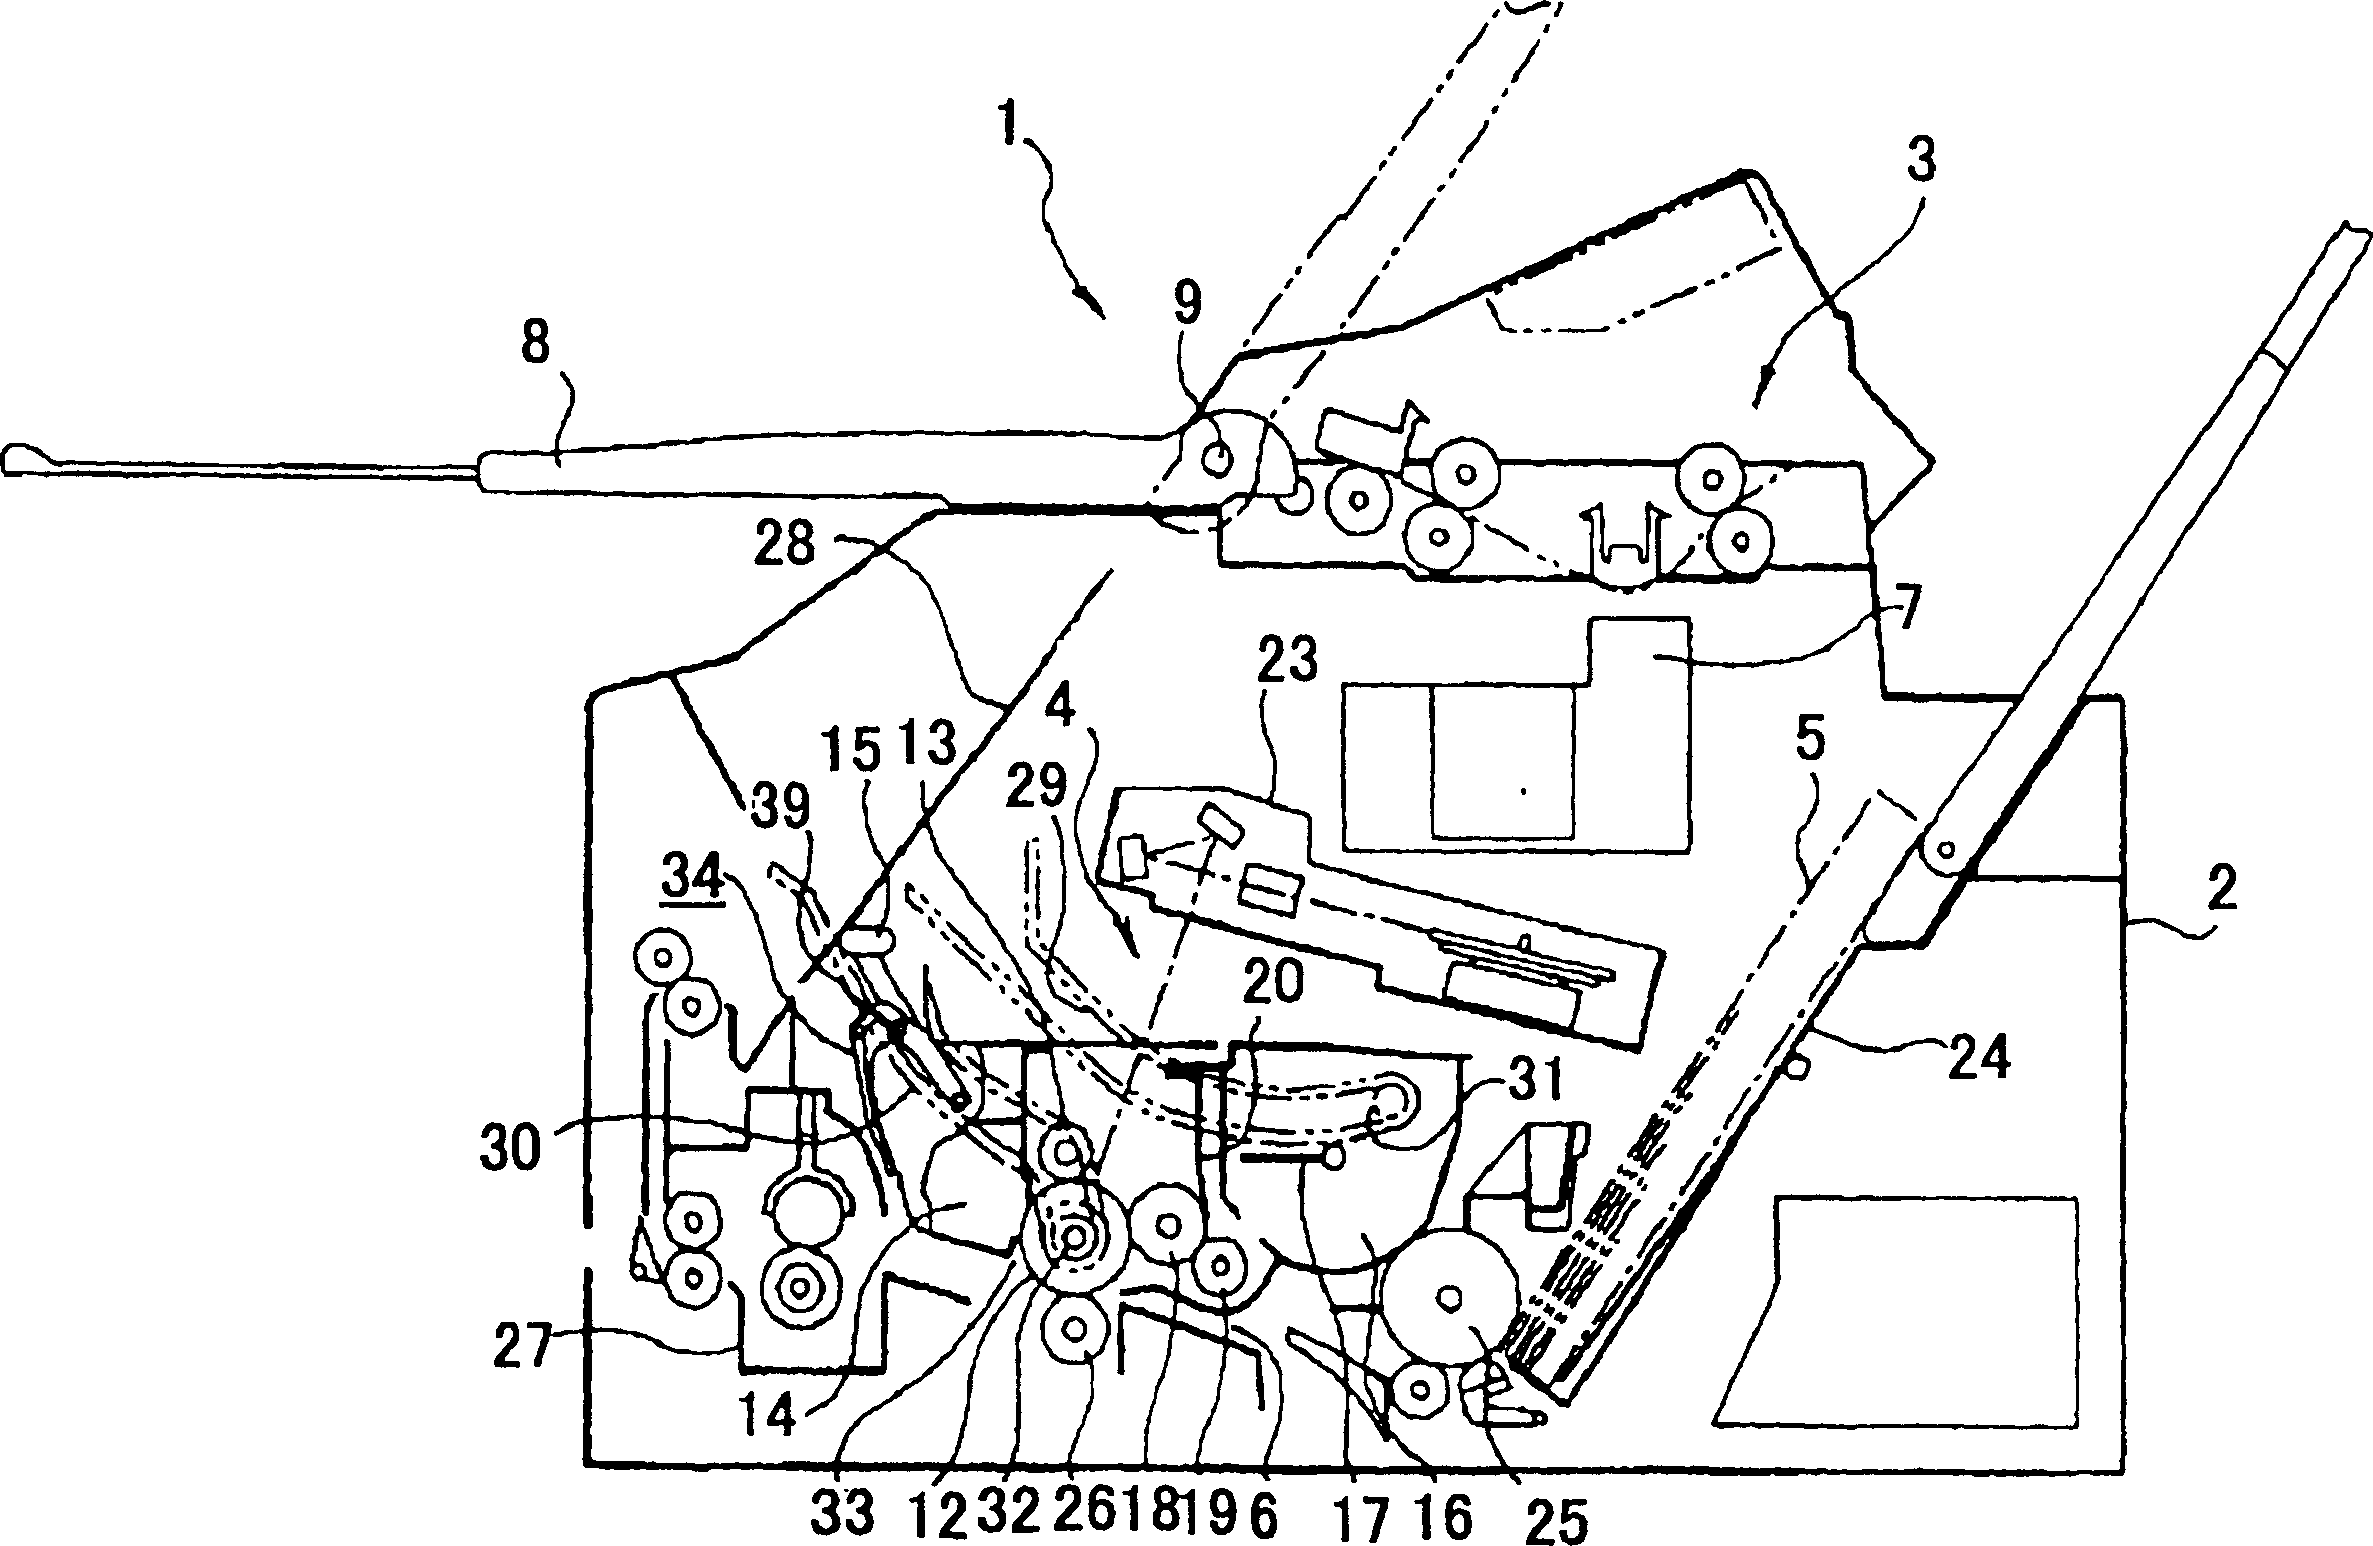 Treating cassette and image forming device